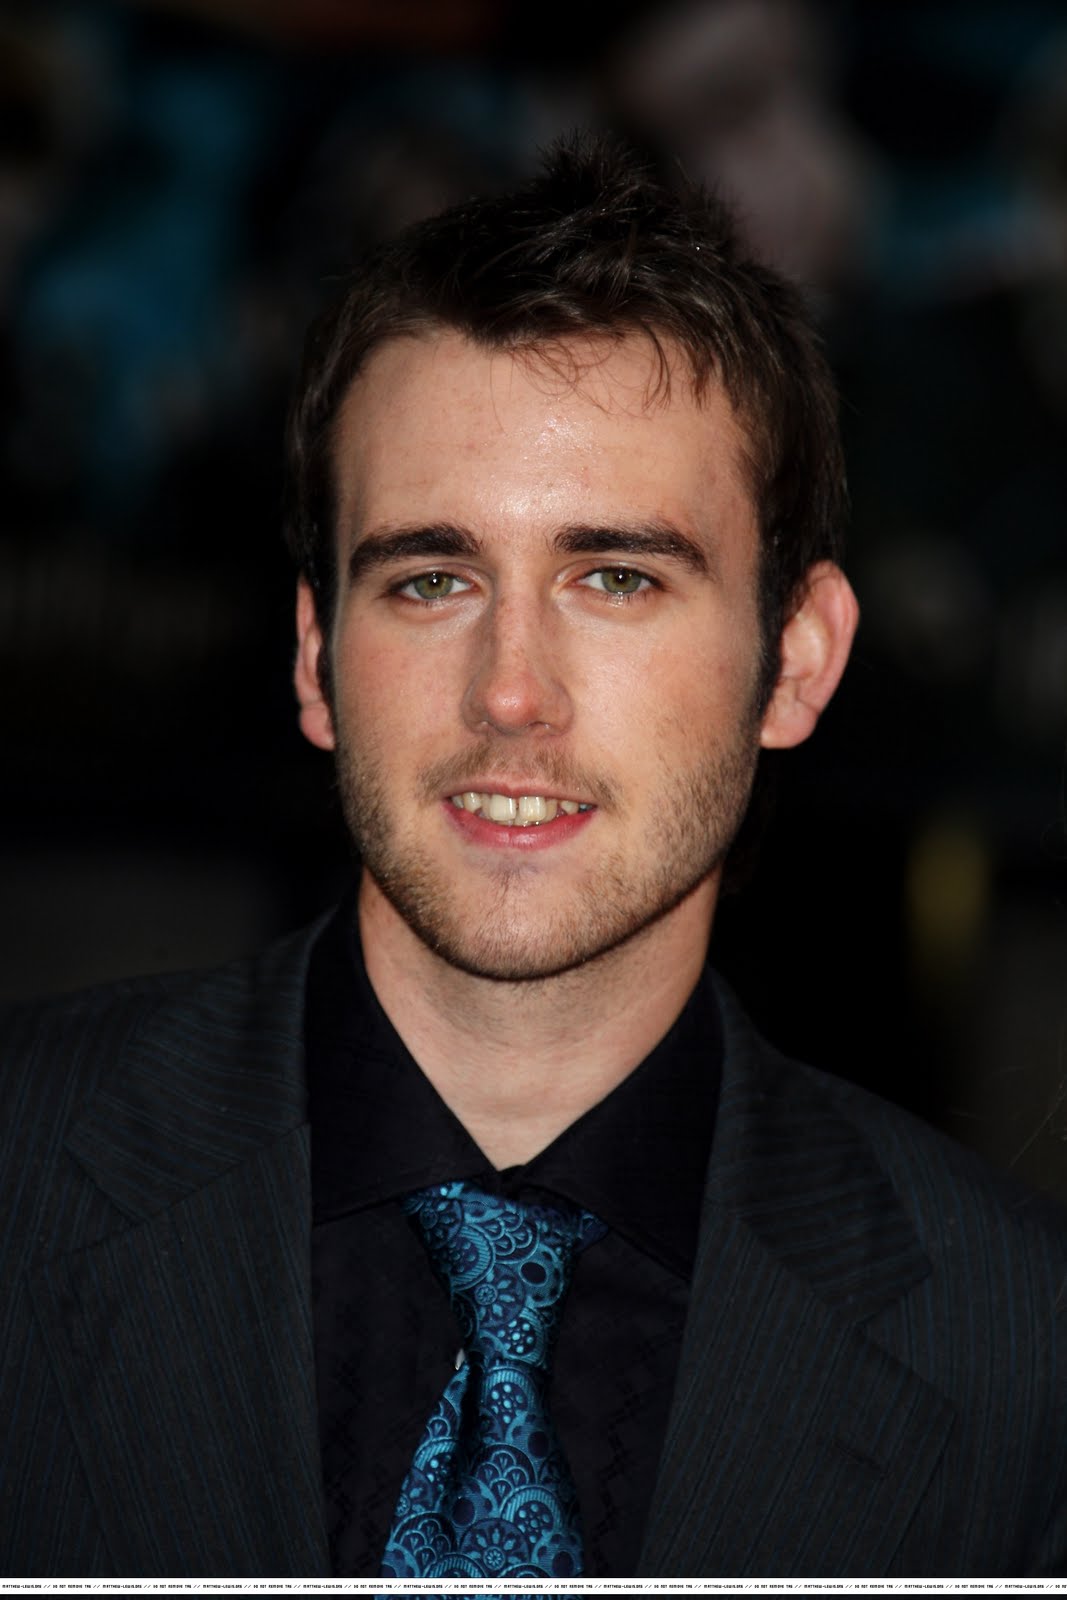 Pictures box stars: Neville Longbottom 2010 deathly hallows Pictures